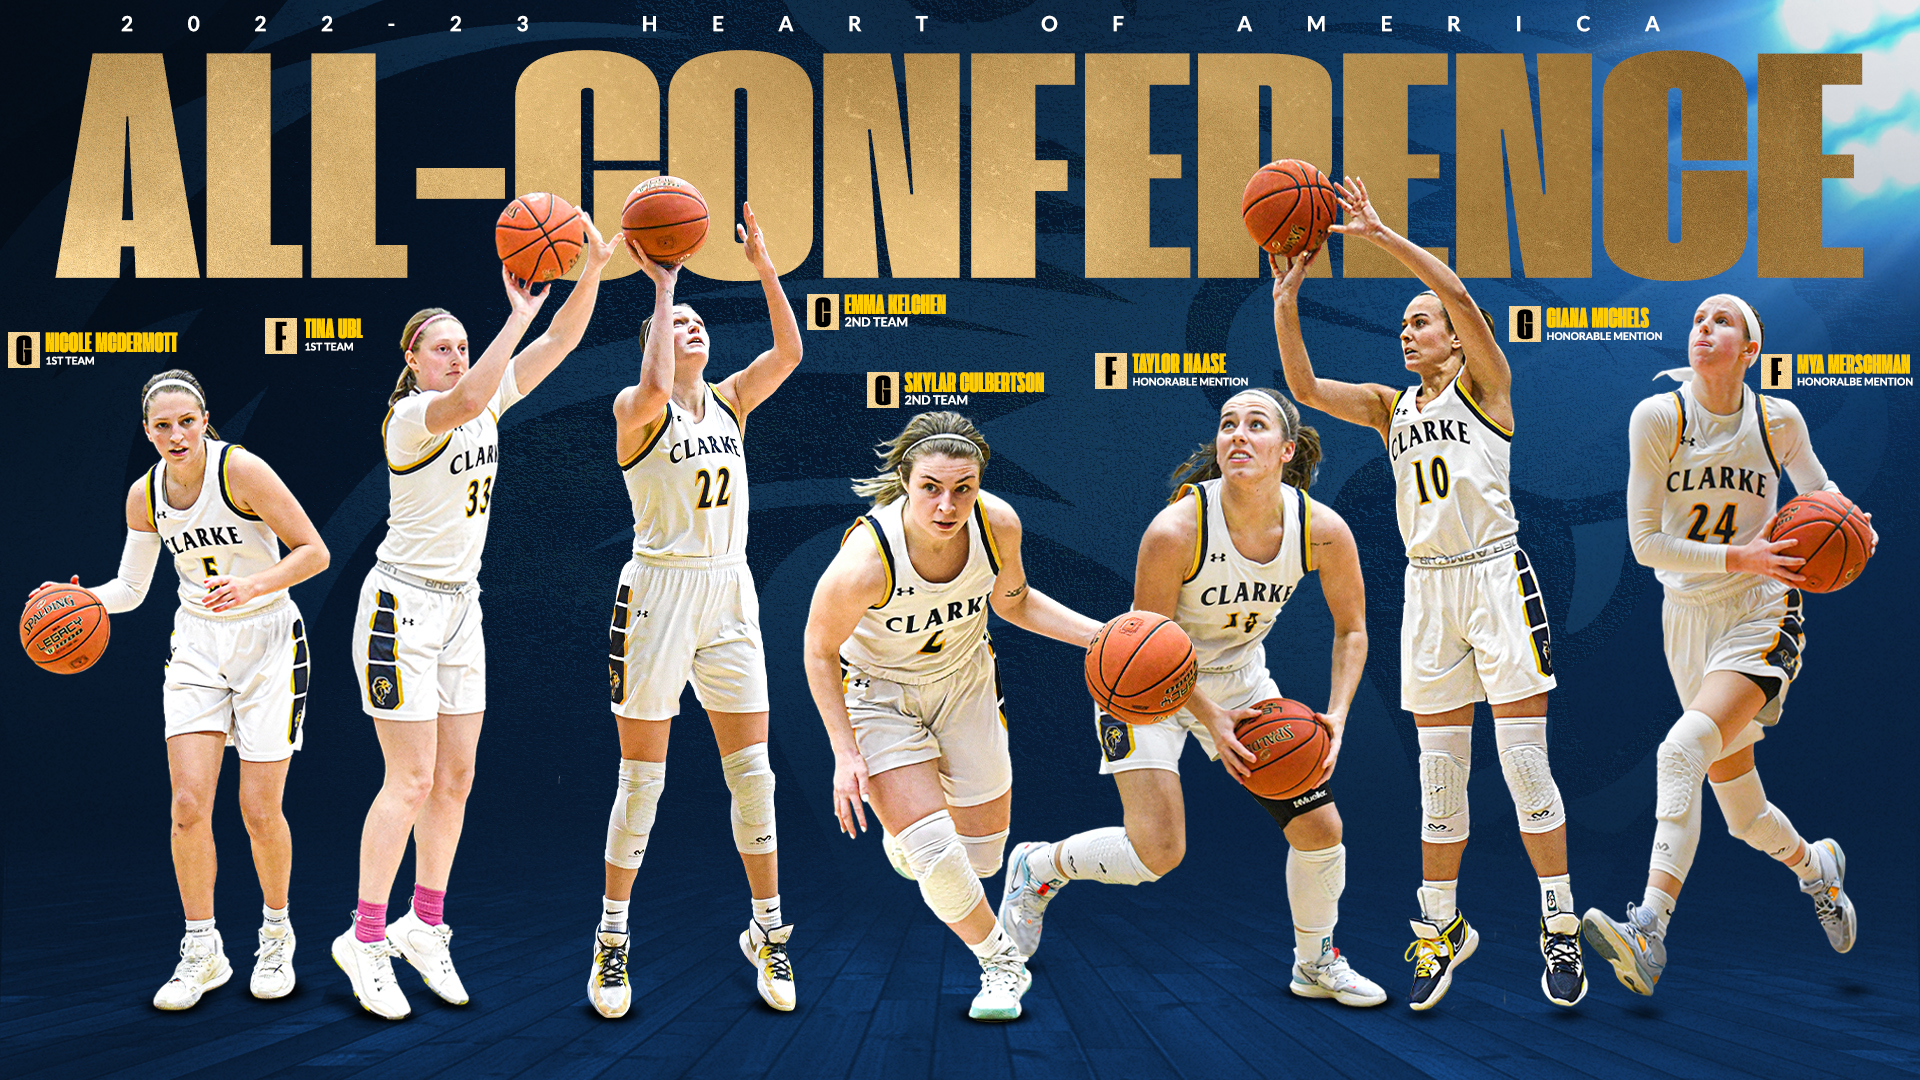 Heart of America All-Conference
Nicole McDermott: 1st Team
Tina Ubl: 1st Team
Emma Kelchen: 2nd Team
Skylar Culbertson: 2nd Team
Taylor Haase: Honorable Mention
Giana Michels: Honorable Mention
Mya Merschman: Honorable Mention